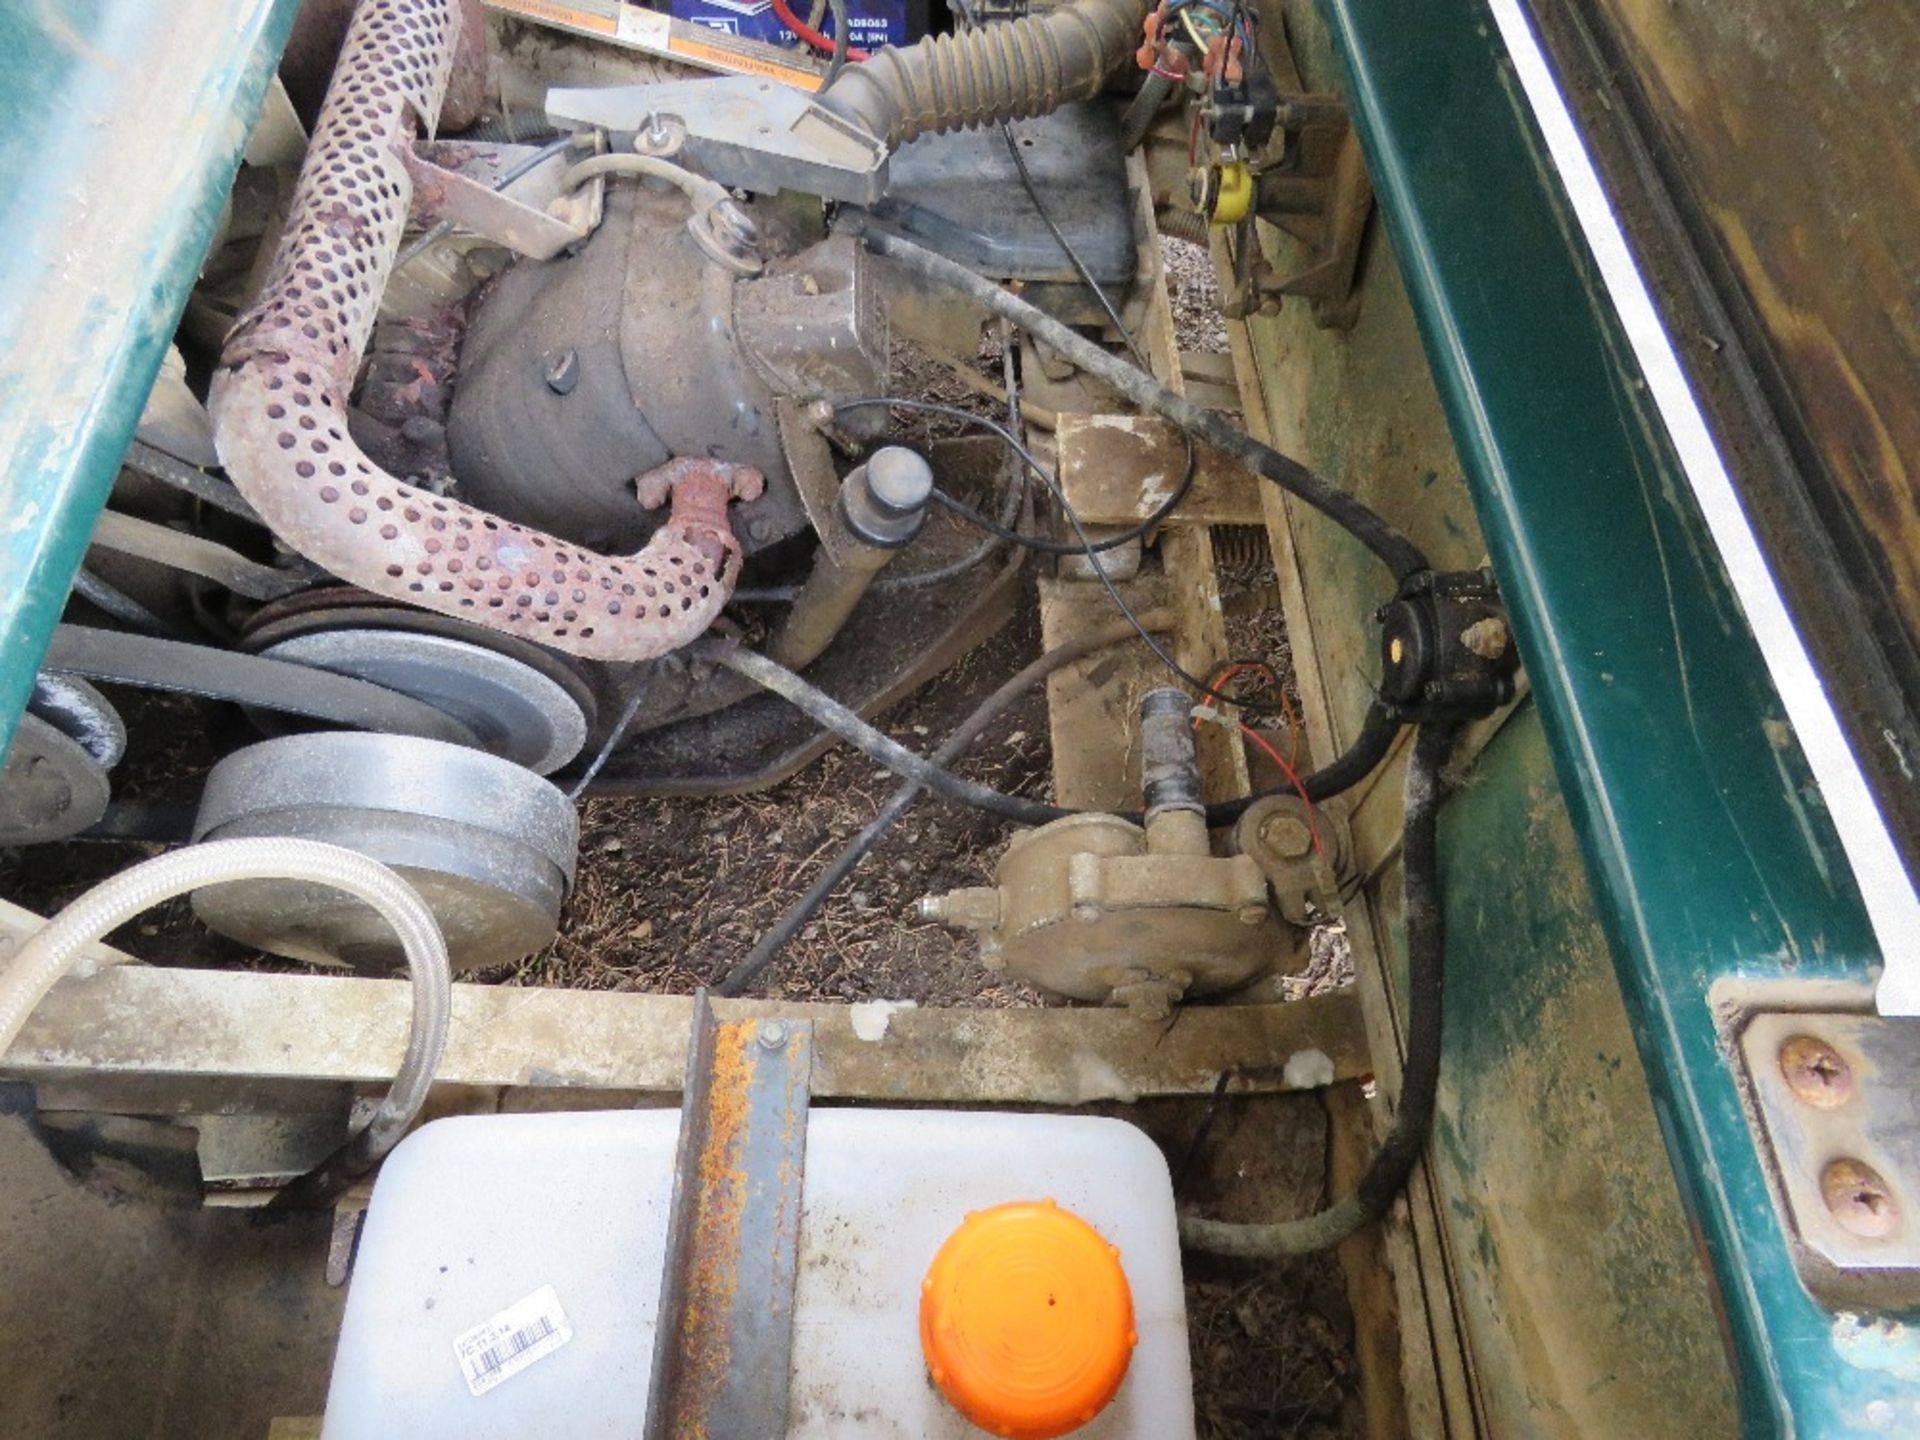 CLUBCAR PETROL ENGINED GOLF CART. BEEN STORED FOR SOME TIME, UNTESTED. - Image 7 of 9